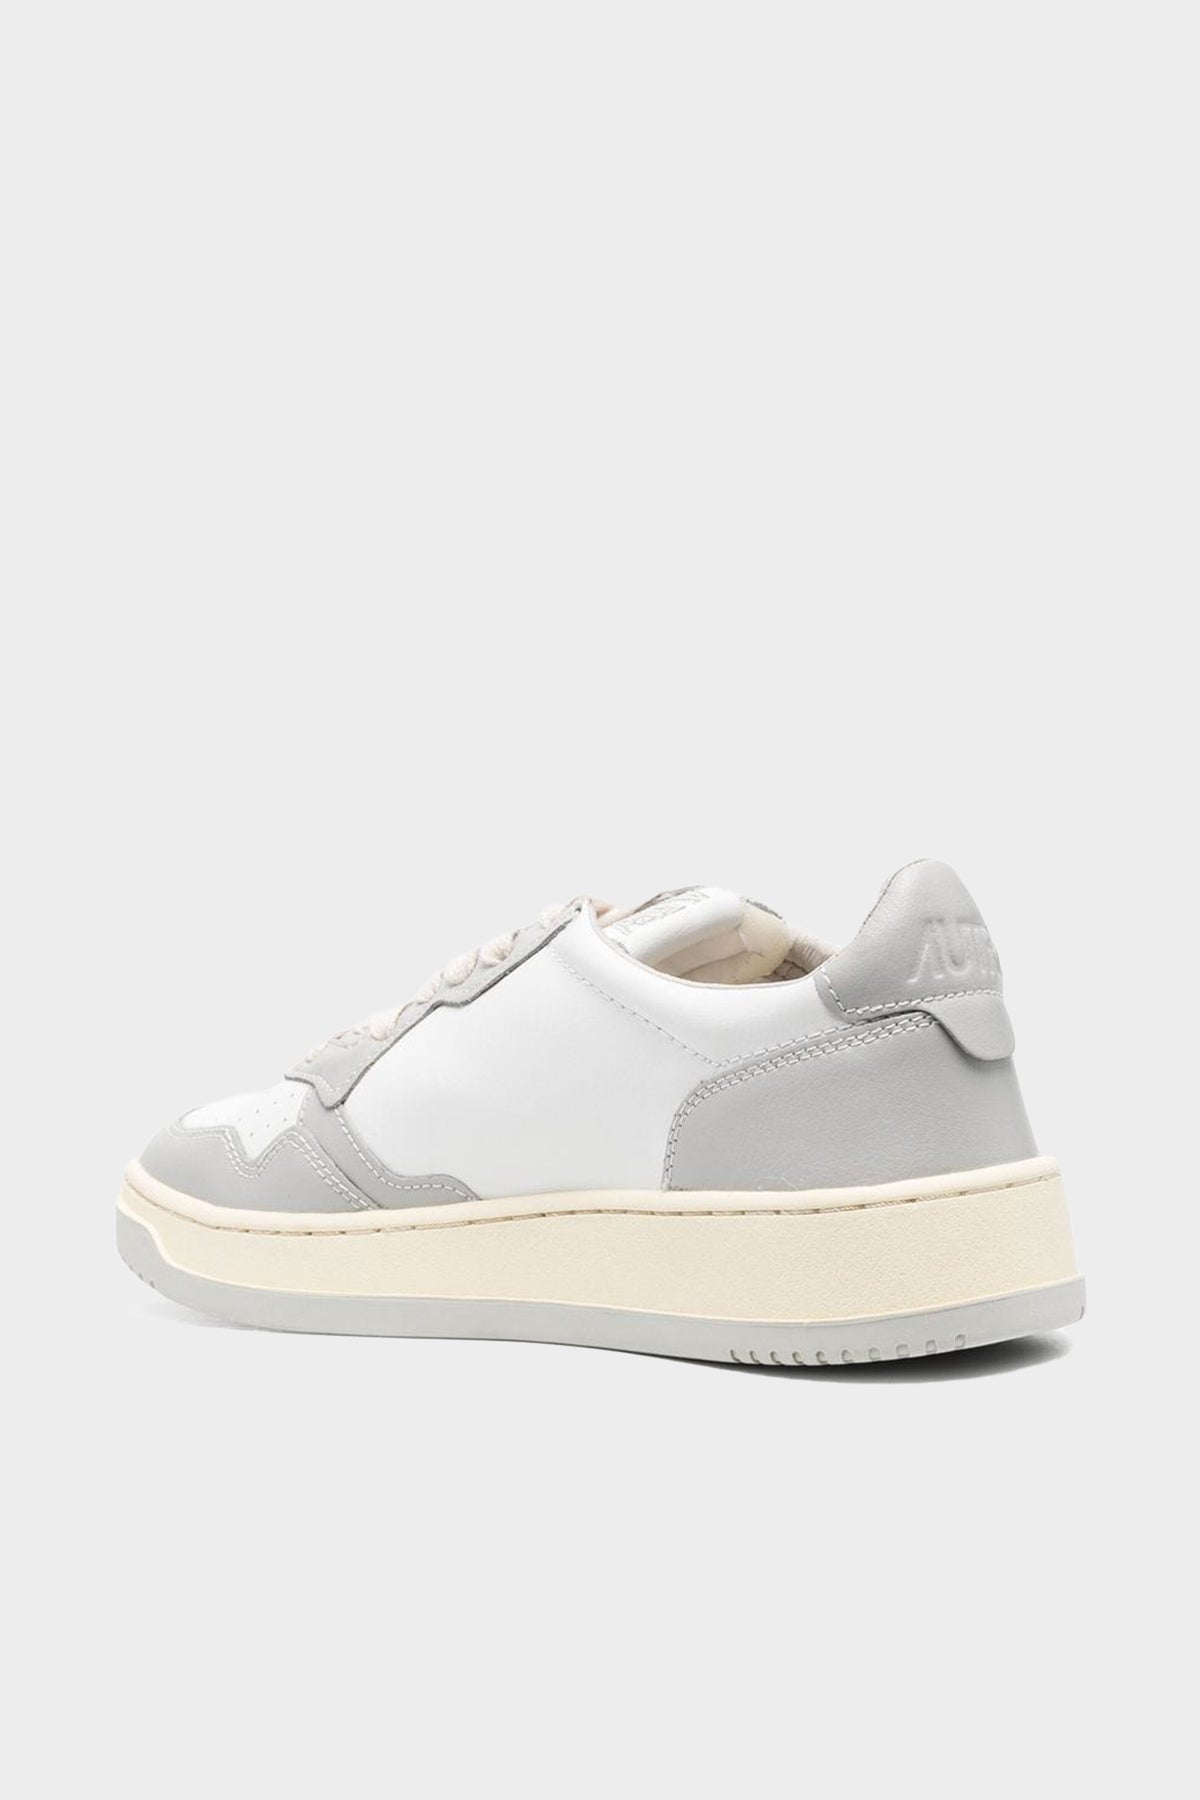 Two-Tone Medalist Low Leather Men Sneaker in White and Vapor - shop-olivia.com